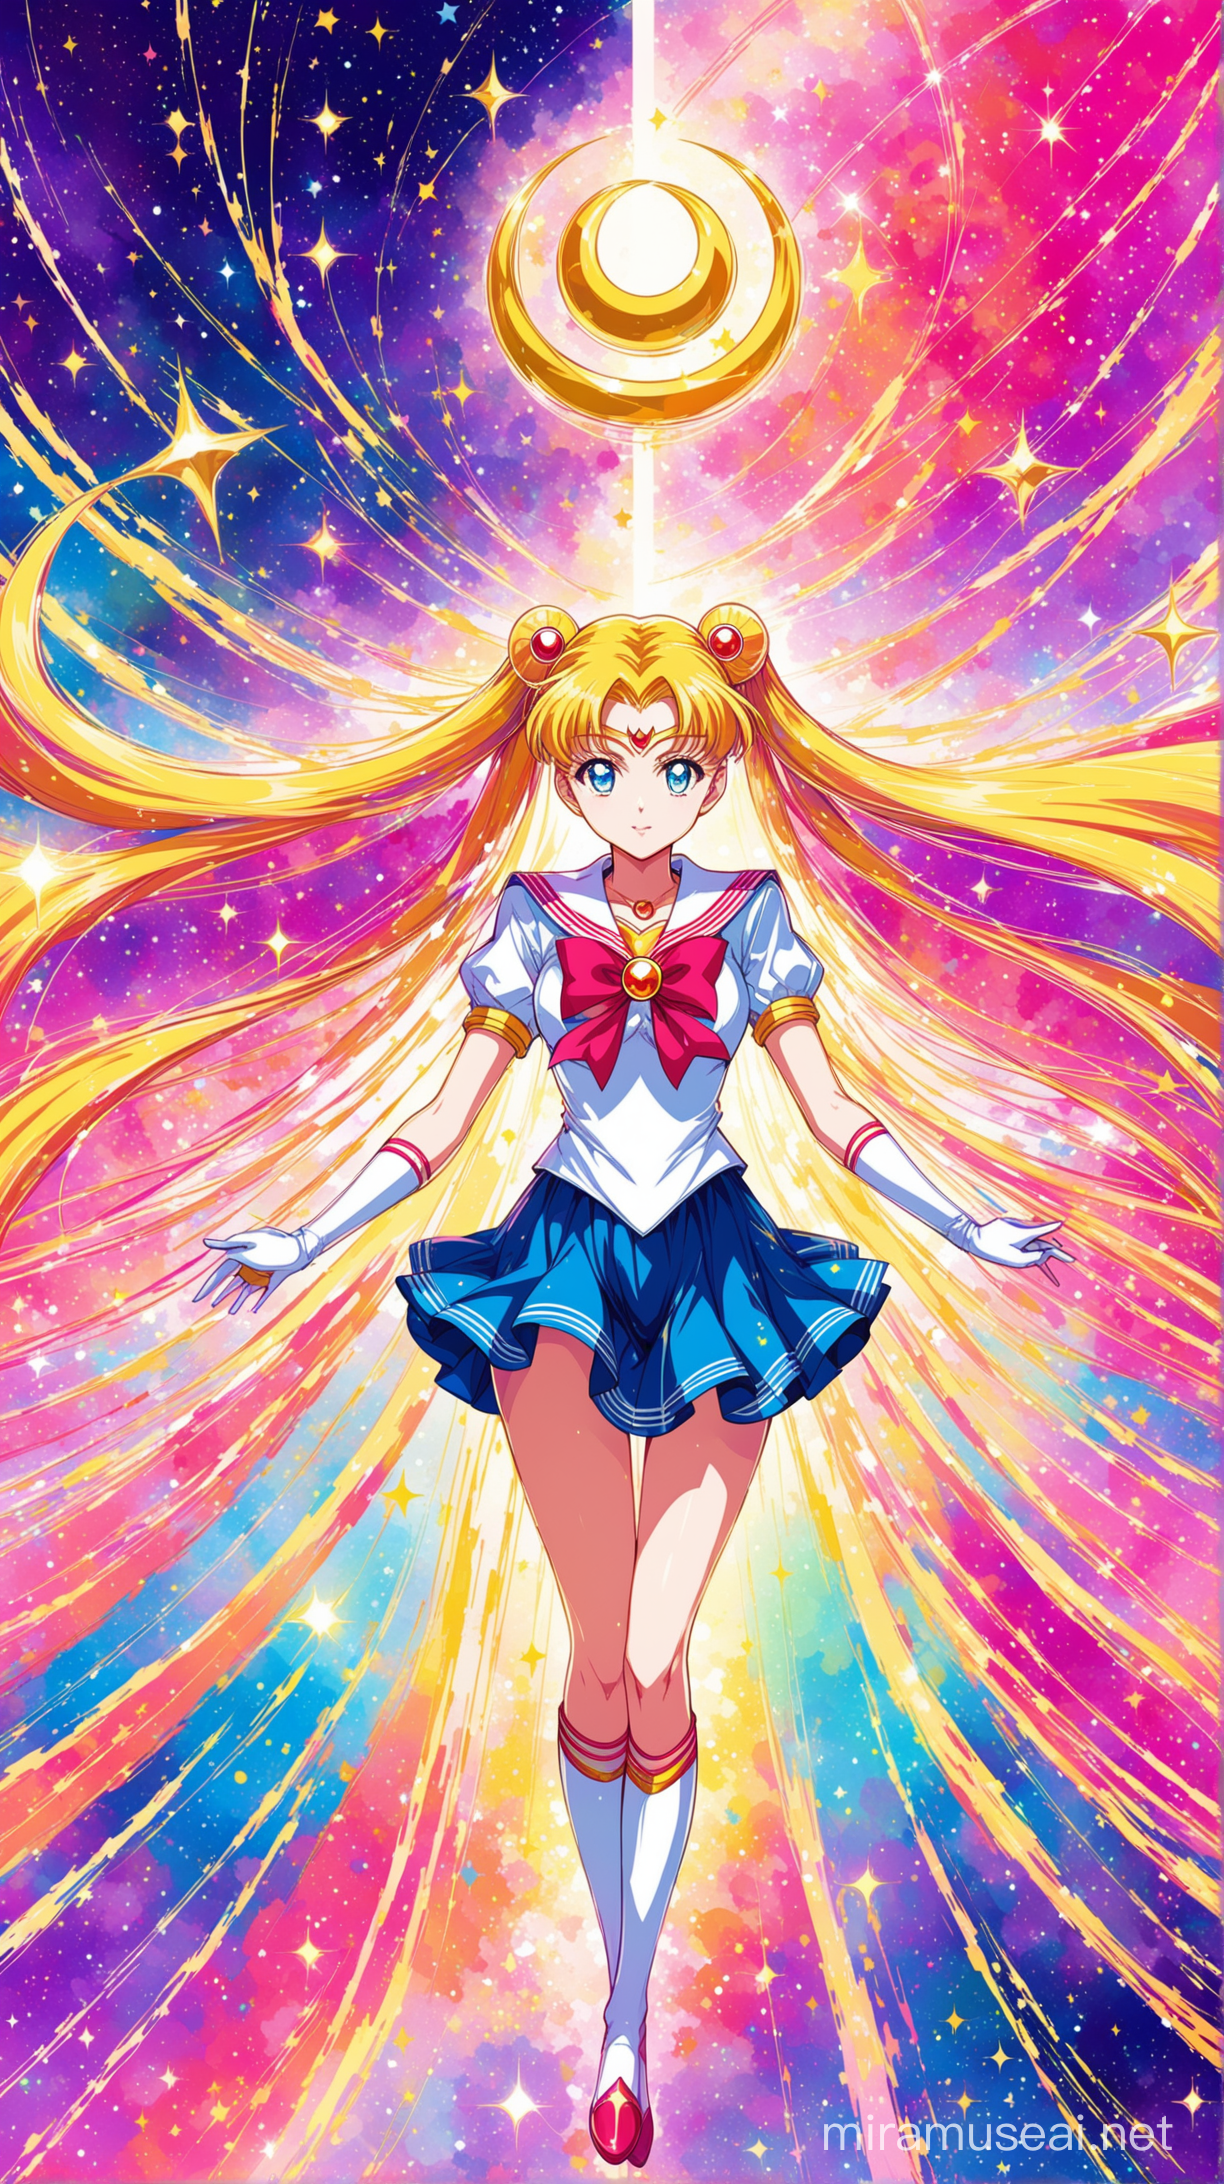 Abstract Sailor Moon Artwork Emanating the Essence of the Iconic Show